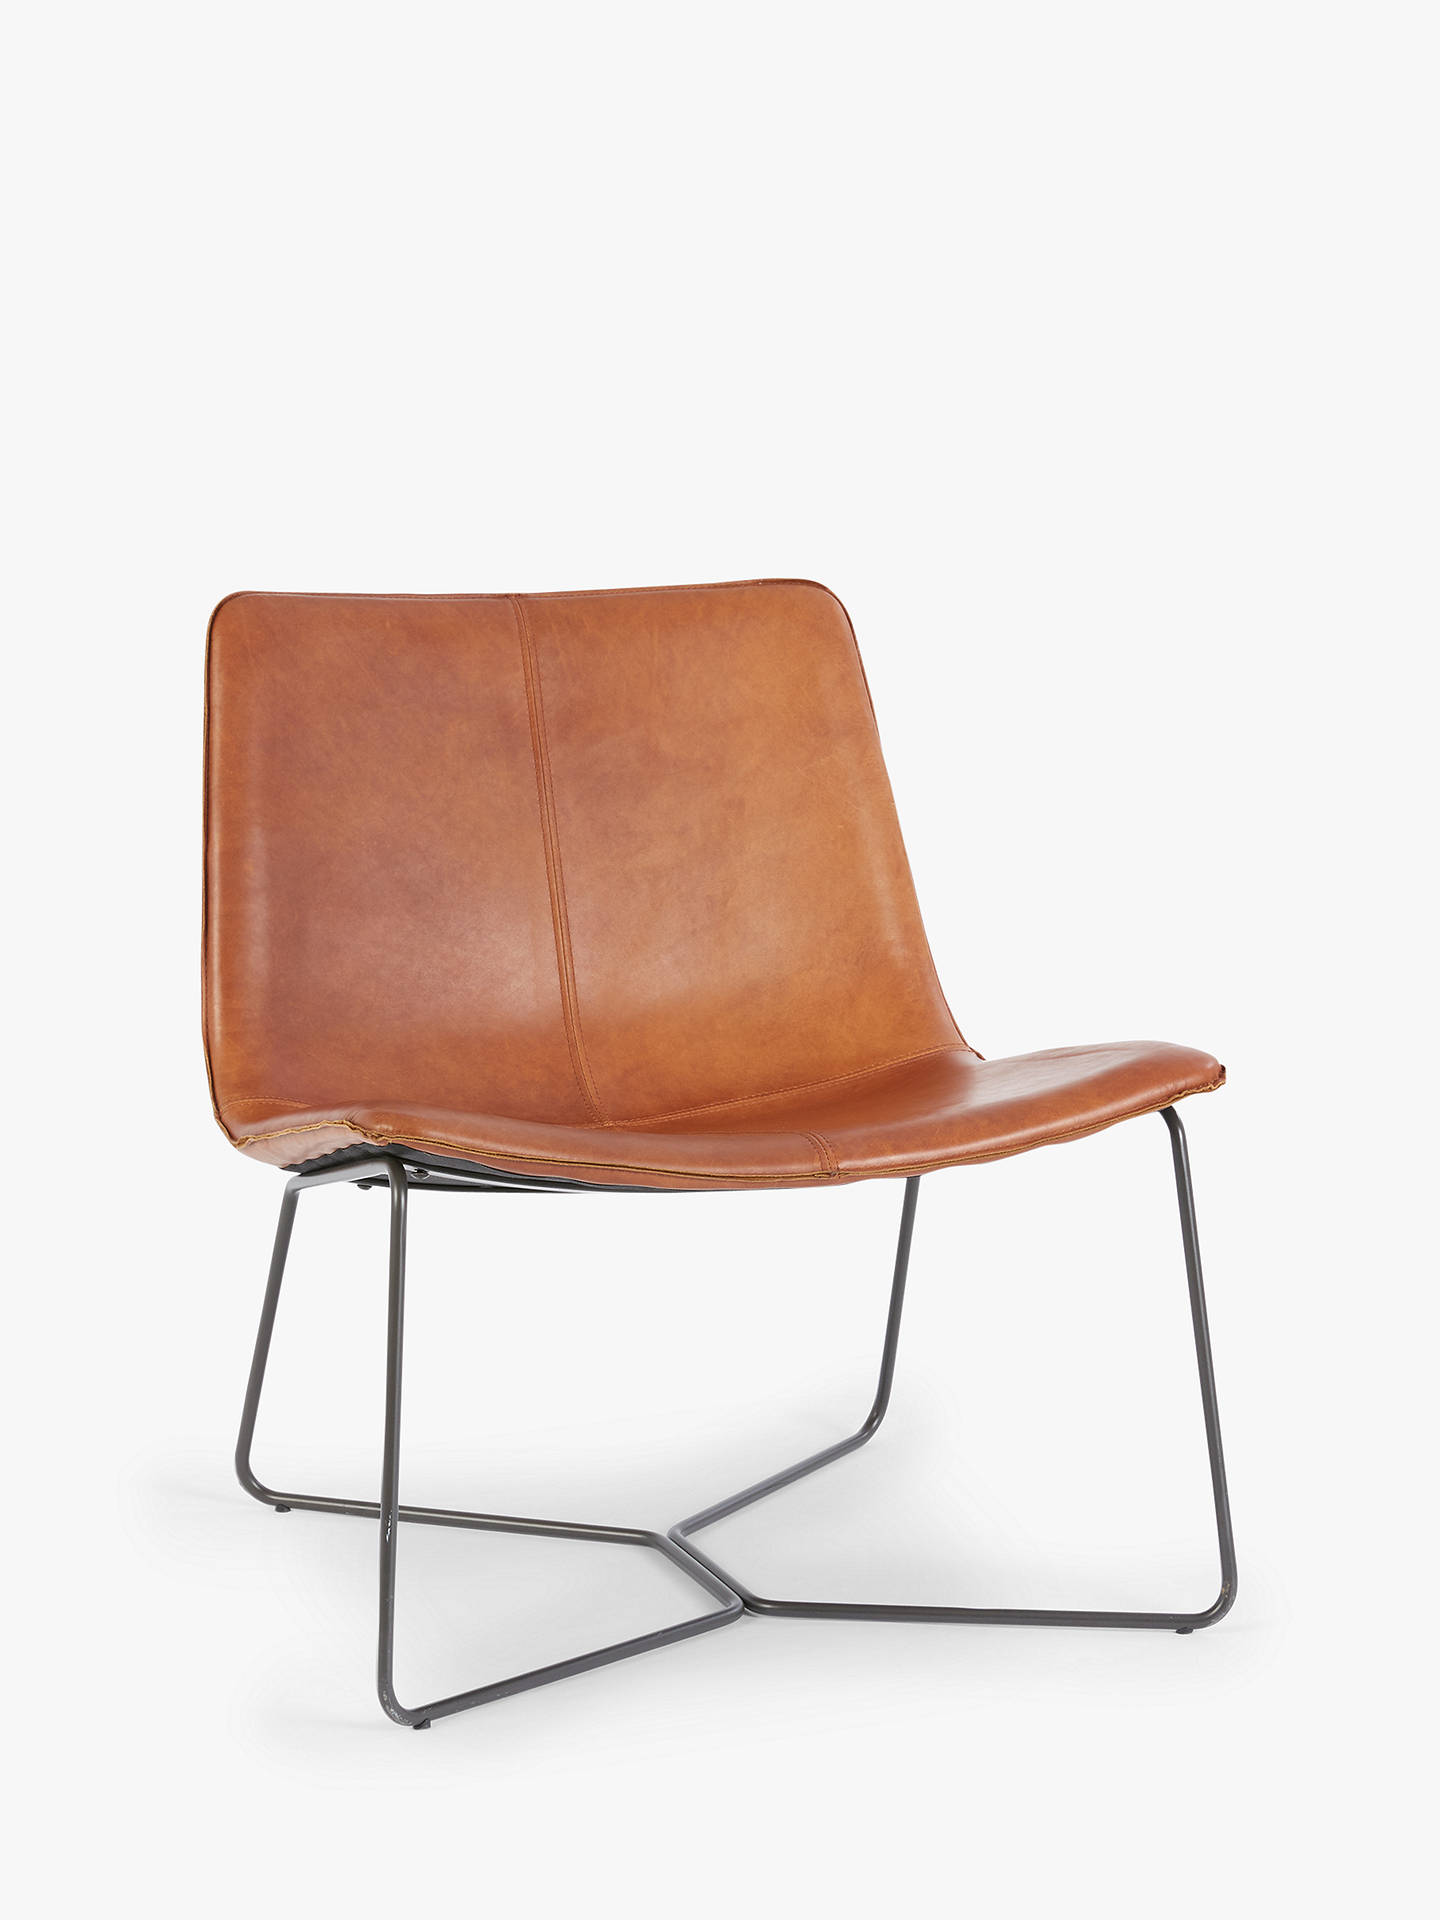  West Elm Saddle Chair for Small Space